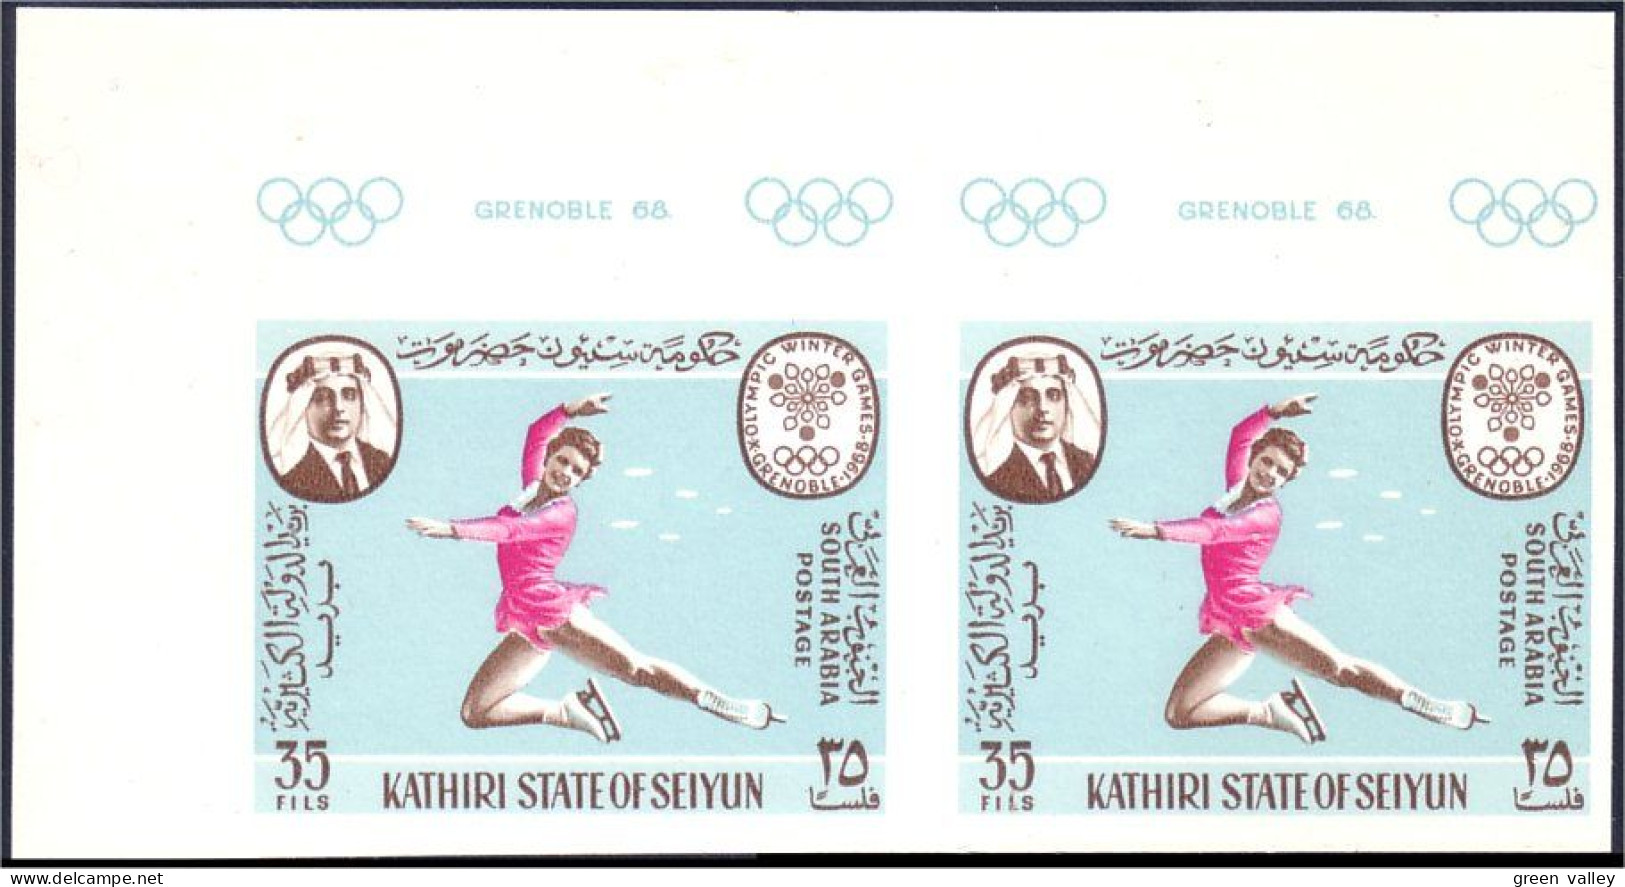 Aden Grenoble 68 Patinage Artistique Figure Skating Paire Non Dentelée Imperforate Pair MNH ** Neuf SC ( A53 378) - Winter 1968: Grenoble